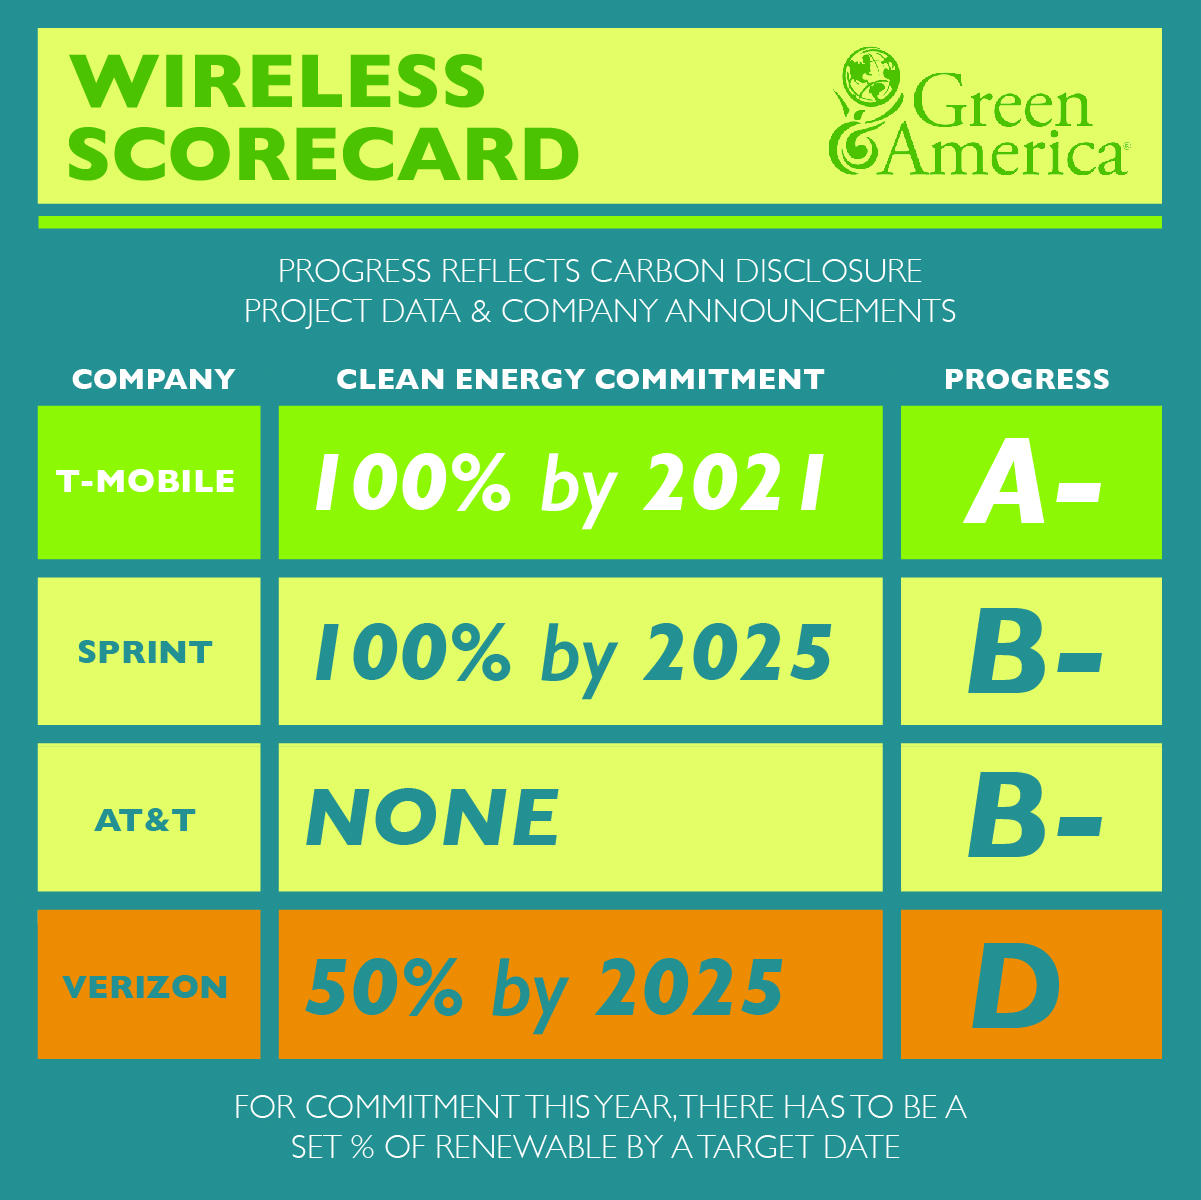 Wireless Scorecard that shows telecoms in the following order and grade: T-Mobile with a 100% by 2021 commitment to clean energy which earns an A- on actual clean energy progress. Sprint earns a B- with its progress and its commitment to reach 100% clean energy by 2025. AT&T earns a B- for its actual progress, but it does not have any clean energy commitment. And Verizon earns a D, because while its commitment is 50% by 2025, it's actual progress is very low. 